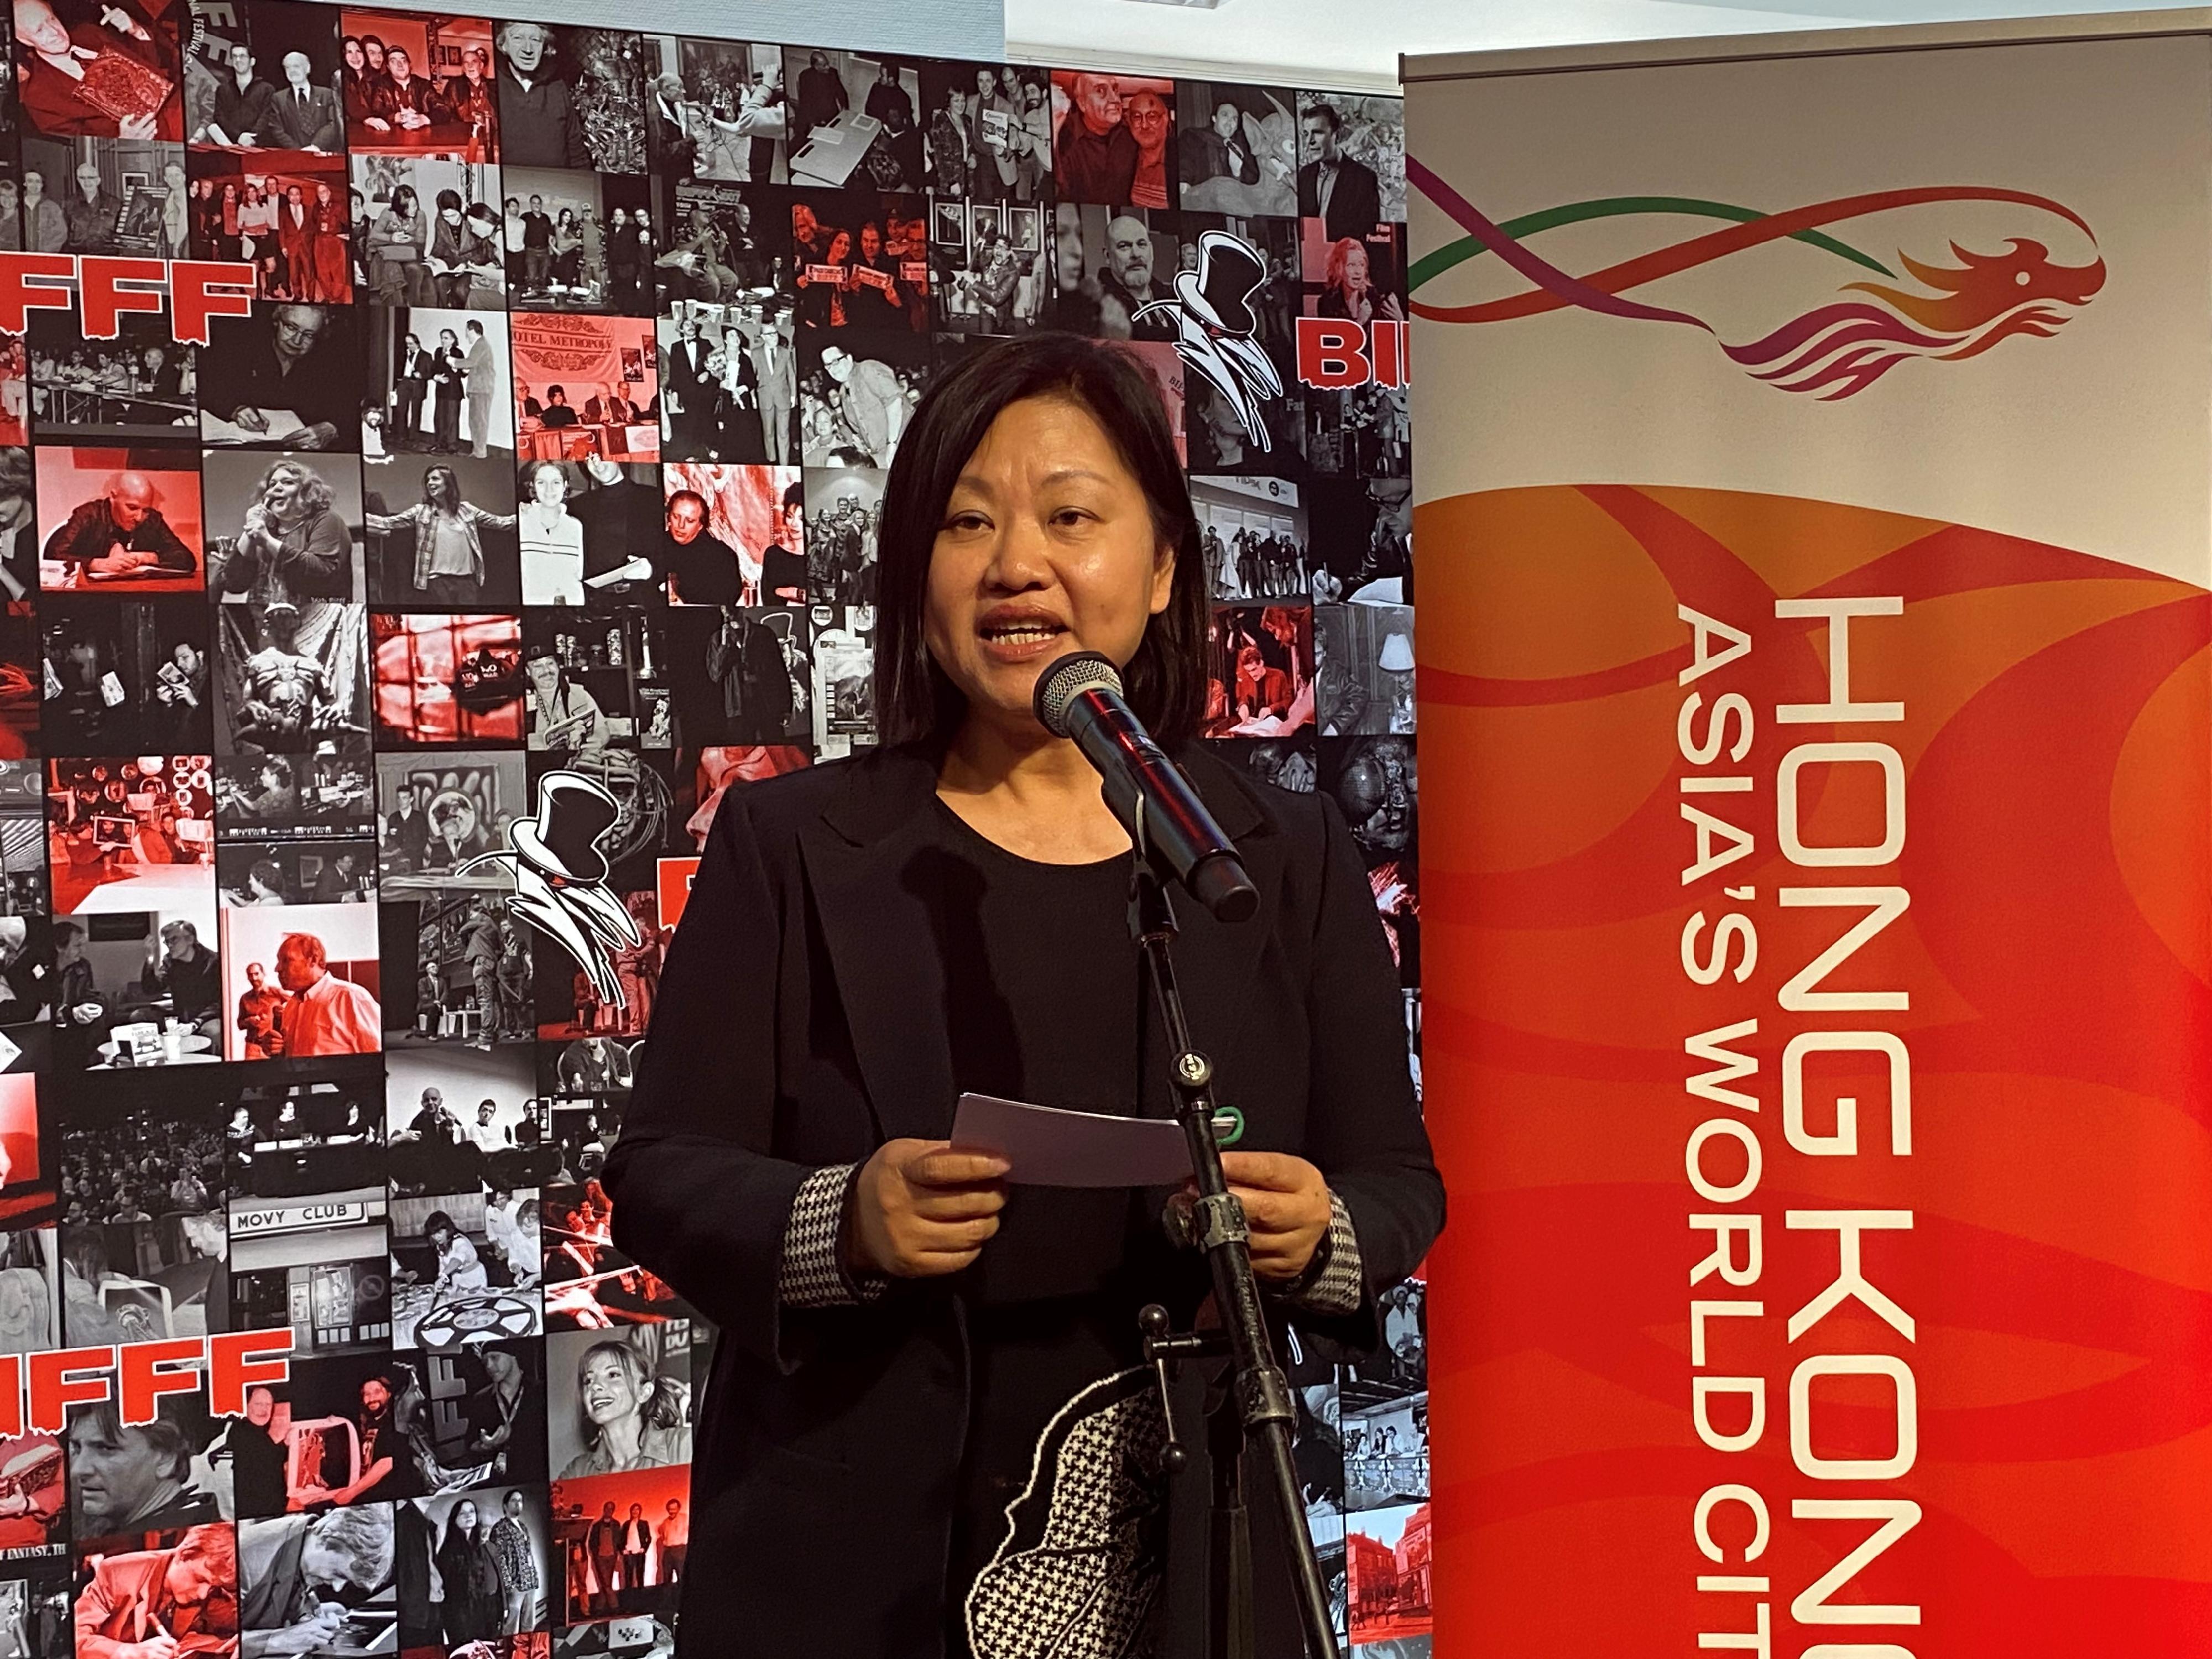 The Special Representative for Hong Kong Economic and Trade Affairs to the European Union, Ms Shirley Yung, spoke to the guests attending the Hong Kong Film Night at the Brussels International Fantastic Film Festival (BIFFF) held on April 10 in Brussels, Belgium (Brussels time) to promote Hong Kong cinema.